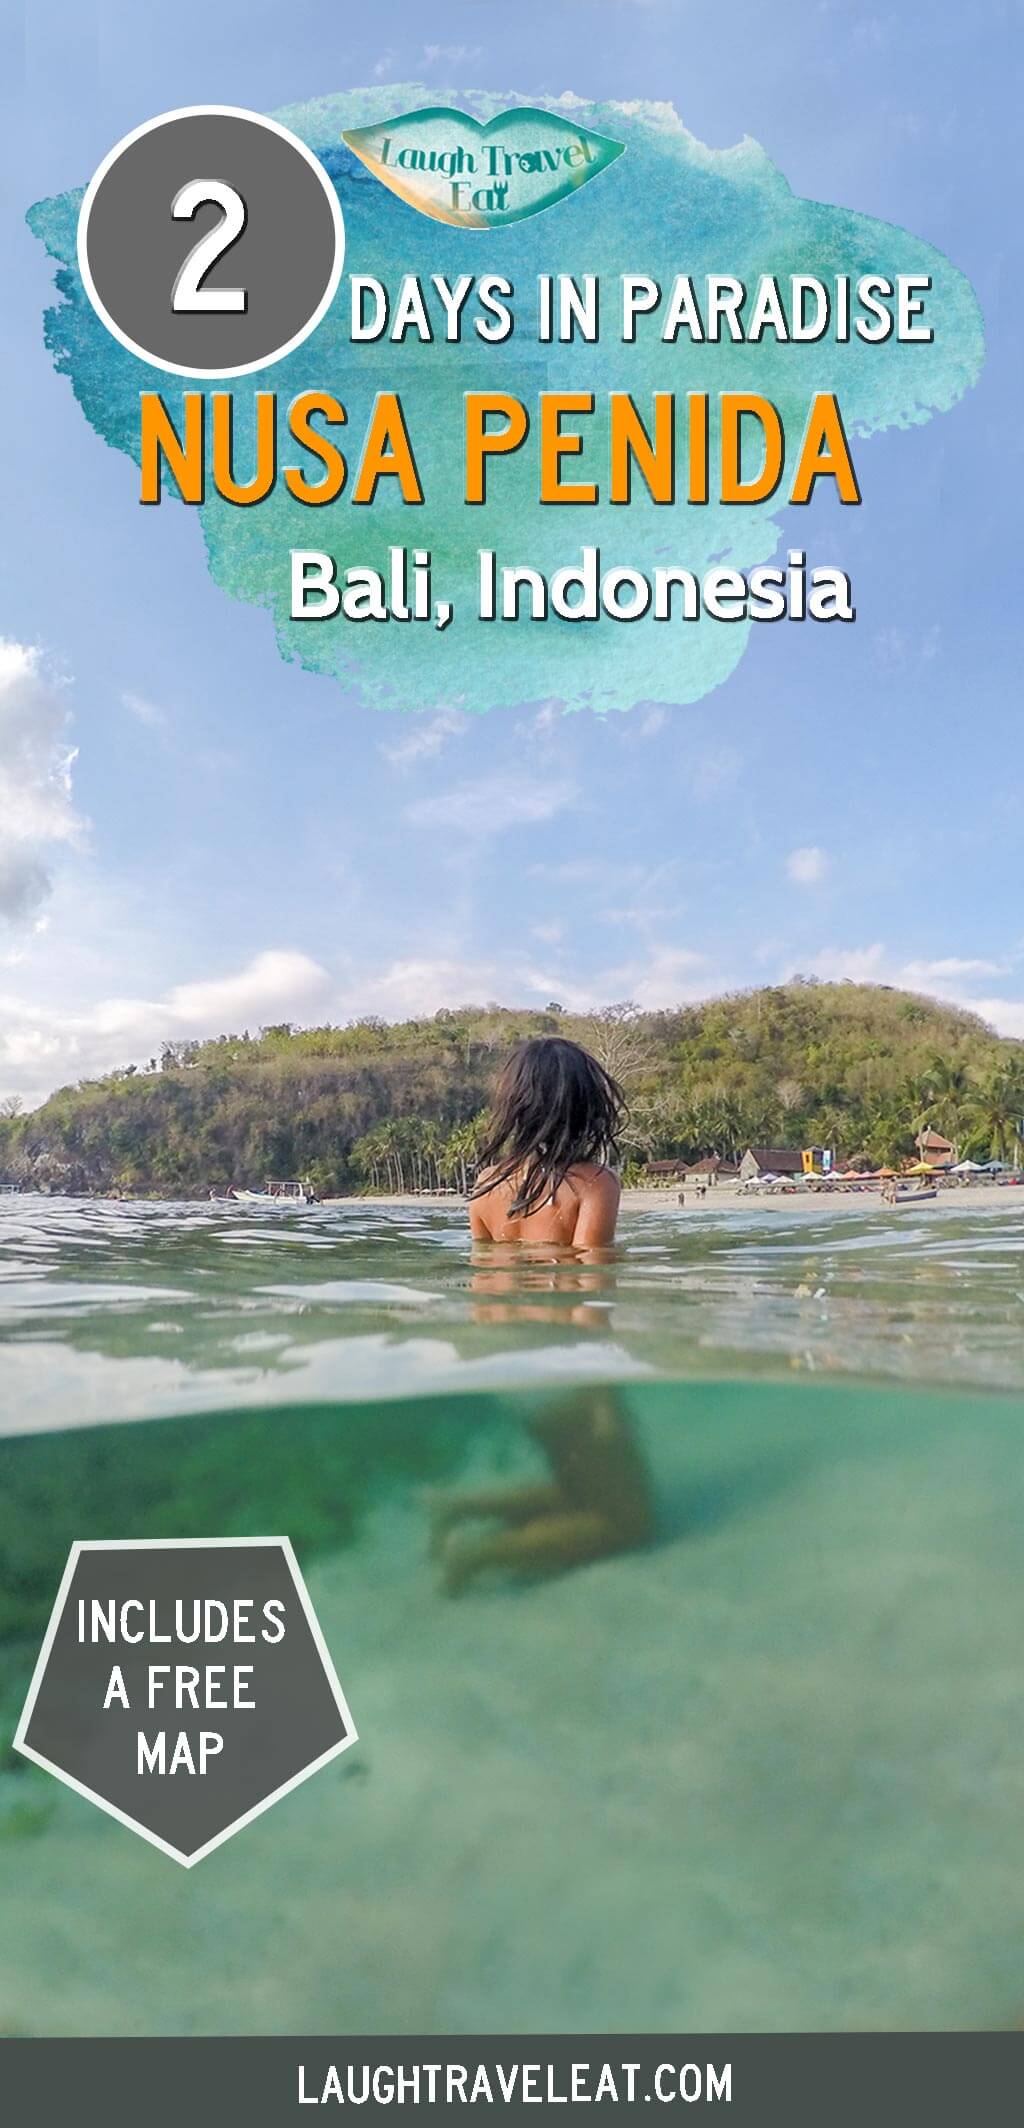 Nusa Penida has one of the best natural sights in Bali. It isn't easy to get around but here's how to visit Nusa Penida in 2 days: